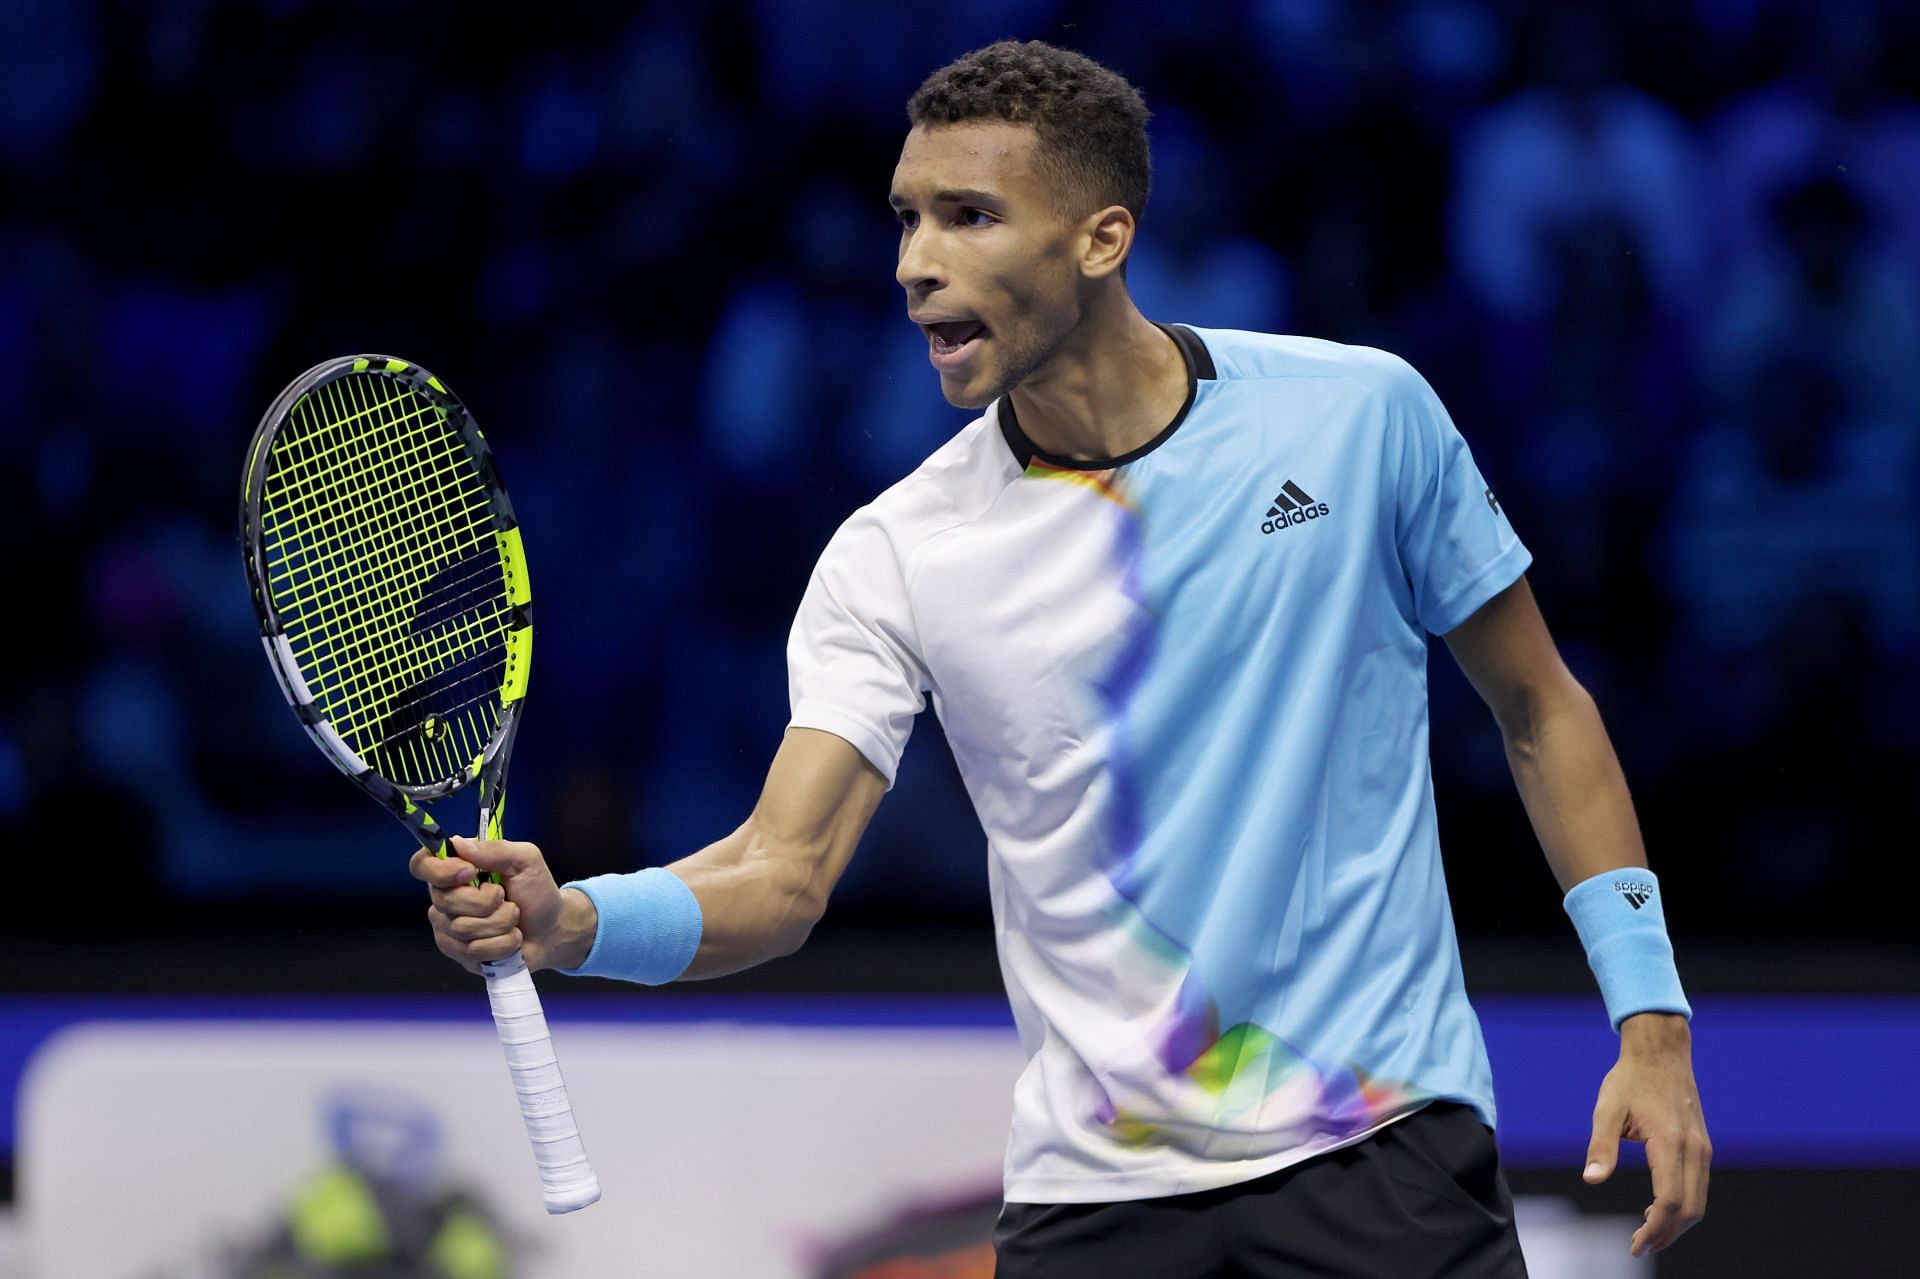 Felix Auger-Aliassime in action at 2022 Nitto ATP Finals in Turin.